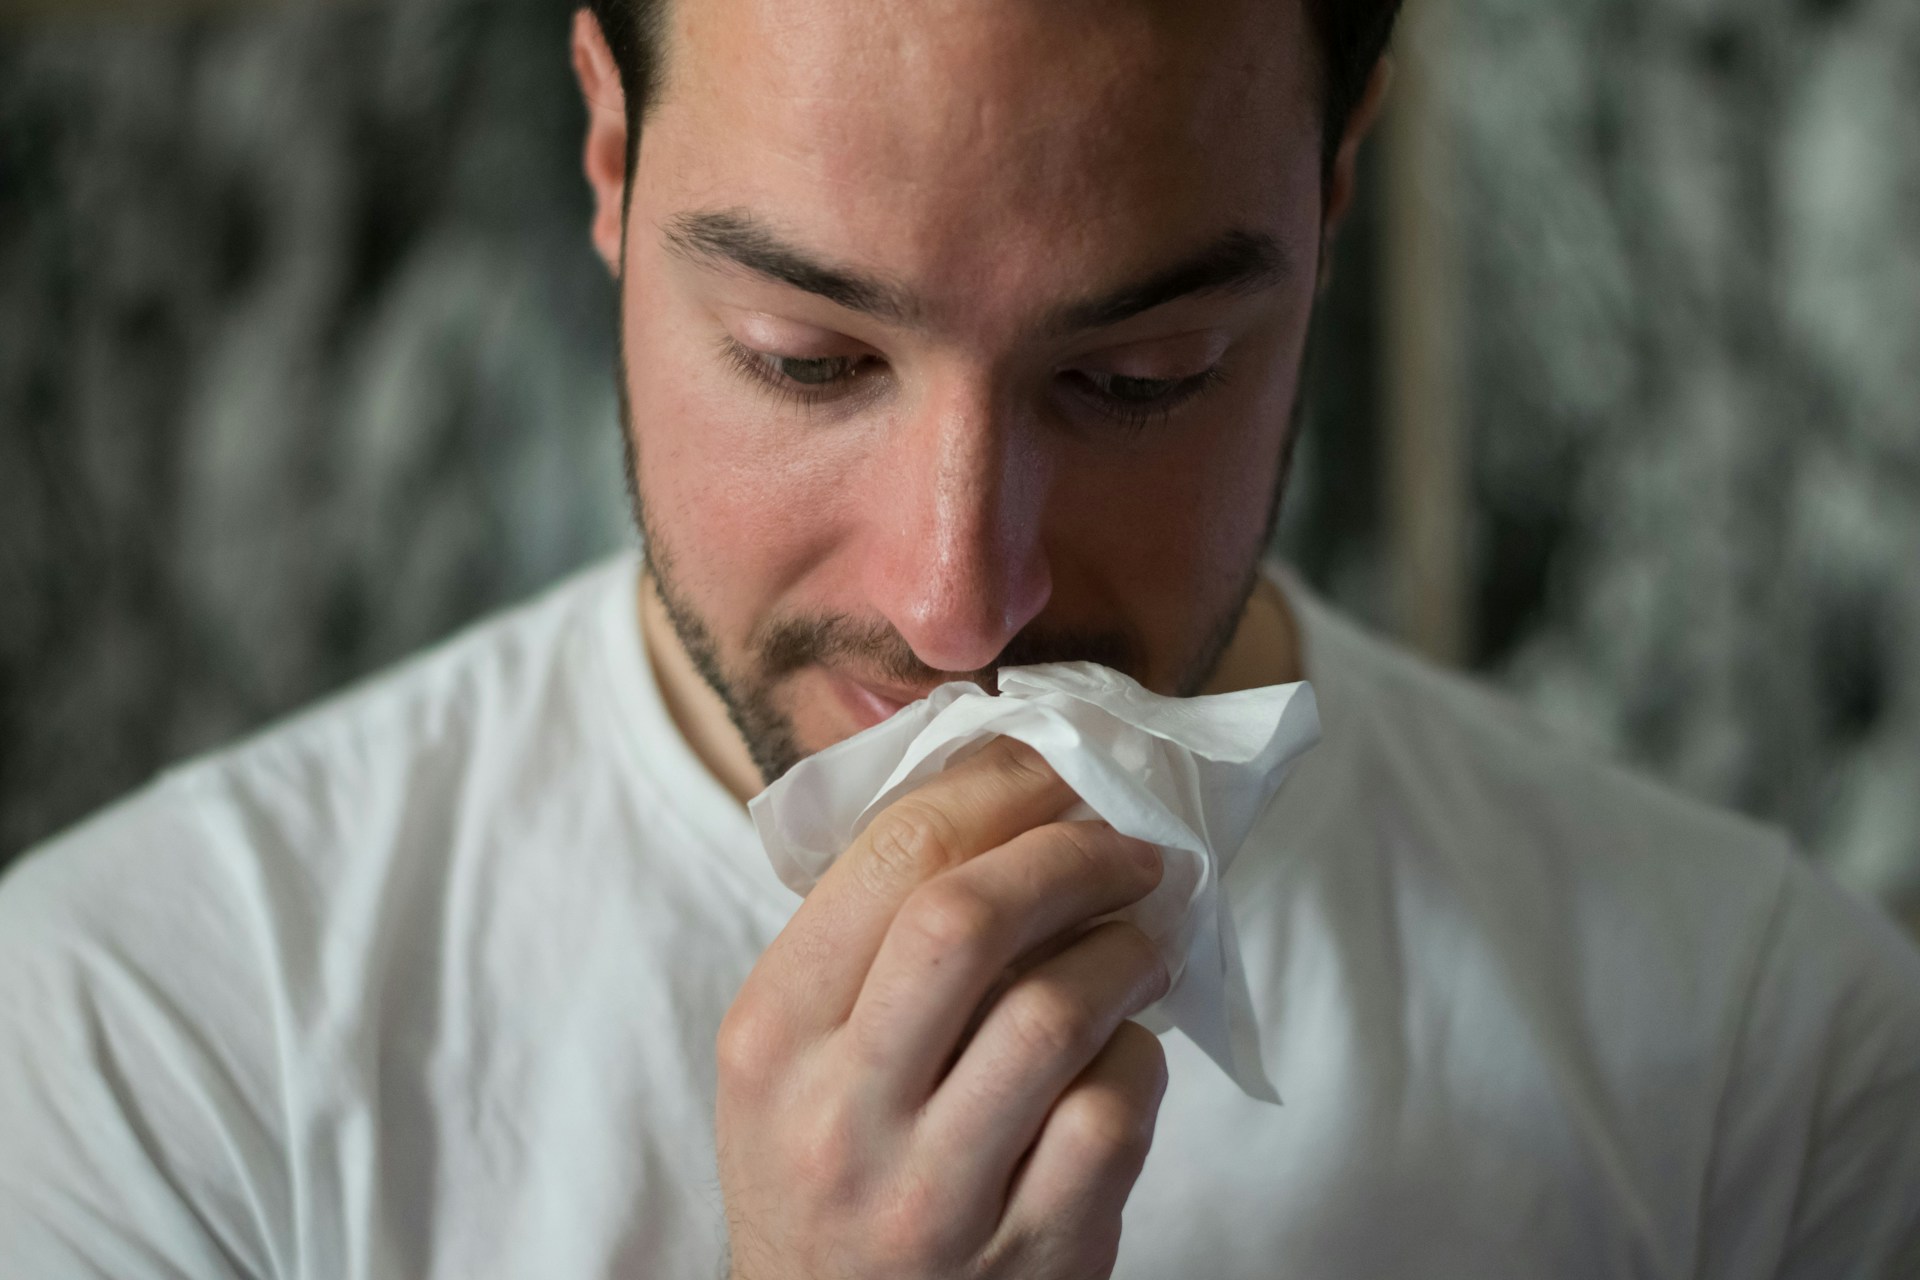 How to Deal with Cough and Colds: OTC Drugs and Natural Remedies to Consider